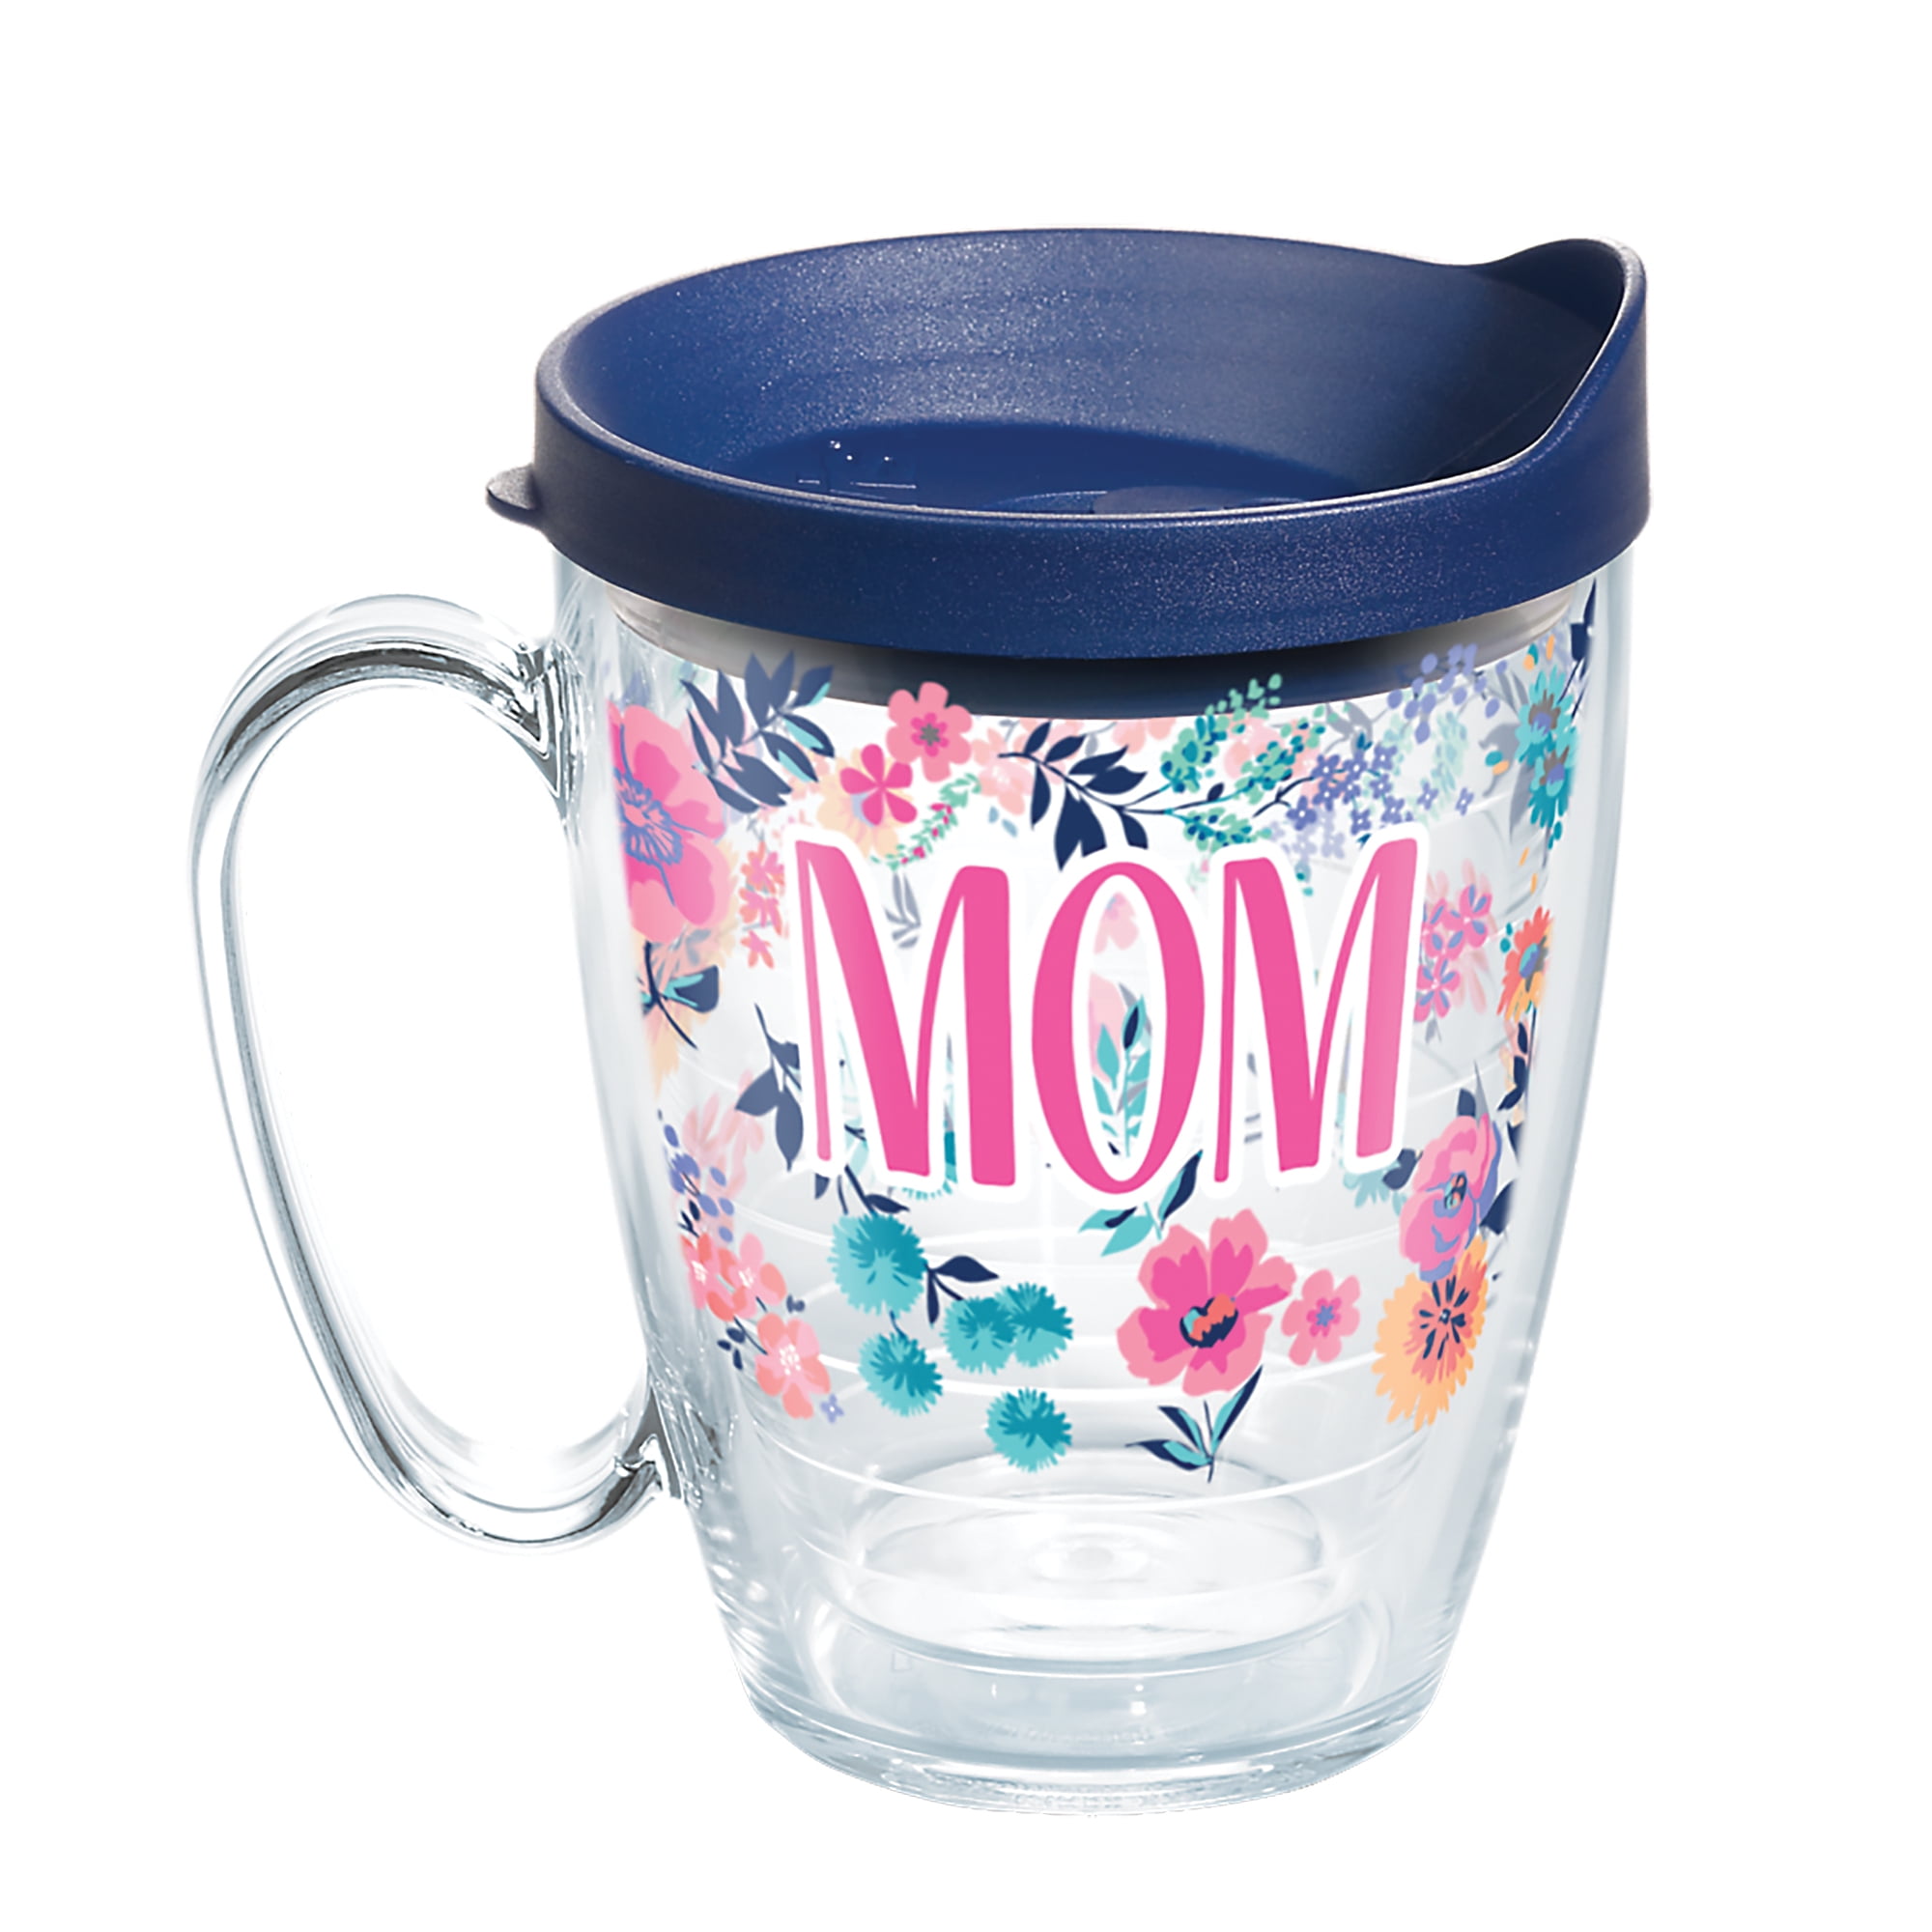 Tervis Best Mom Ever Floral Made in USA Double Walled Insulated Tumbler Cup Keeps Drinks Cold & Hot, 16oz, Classic